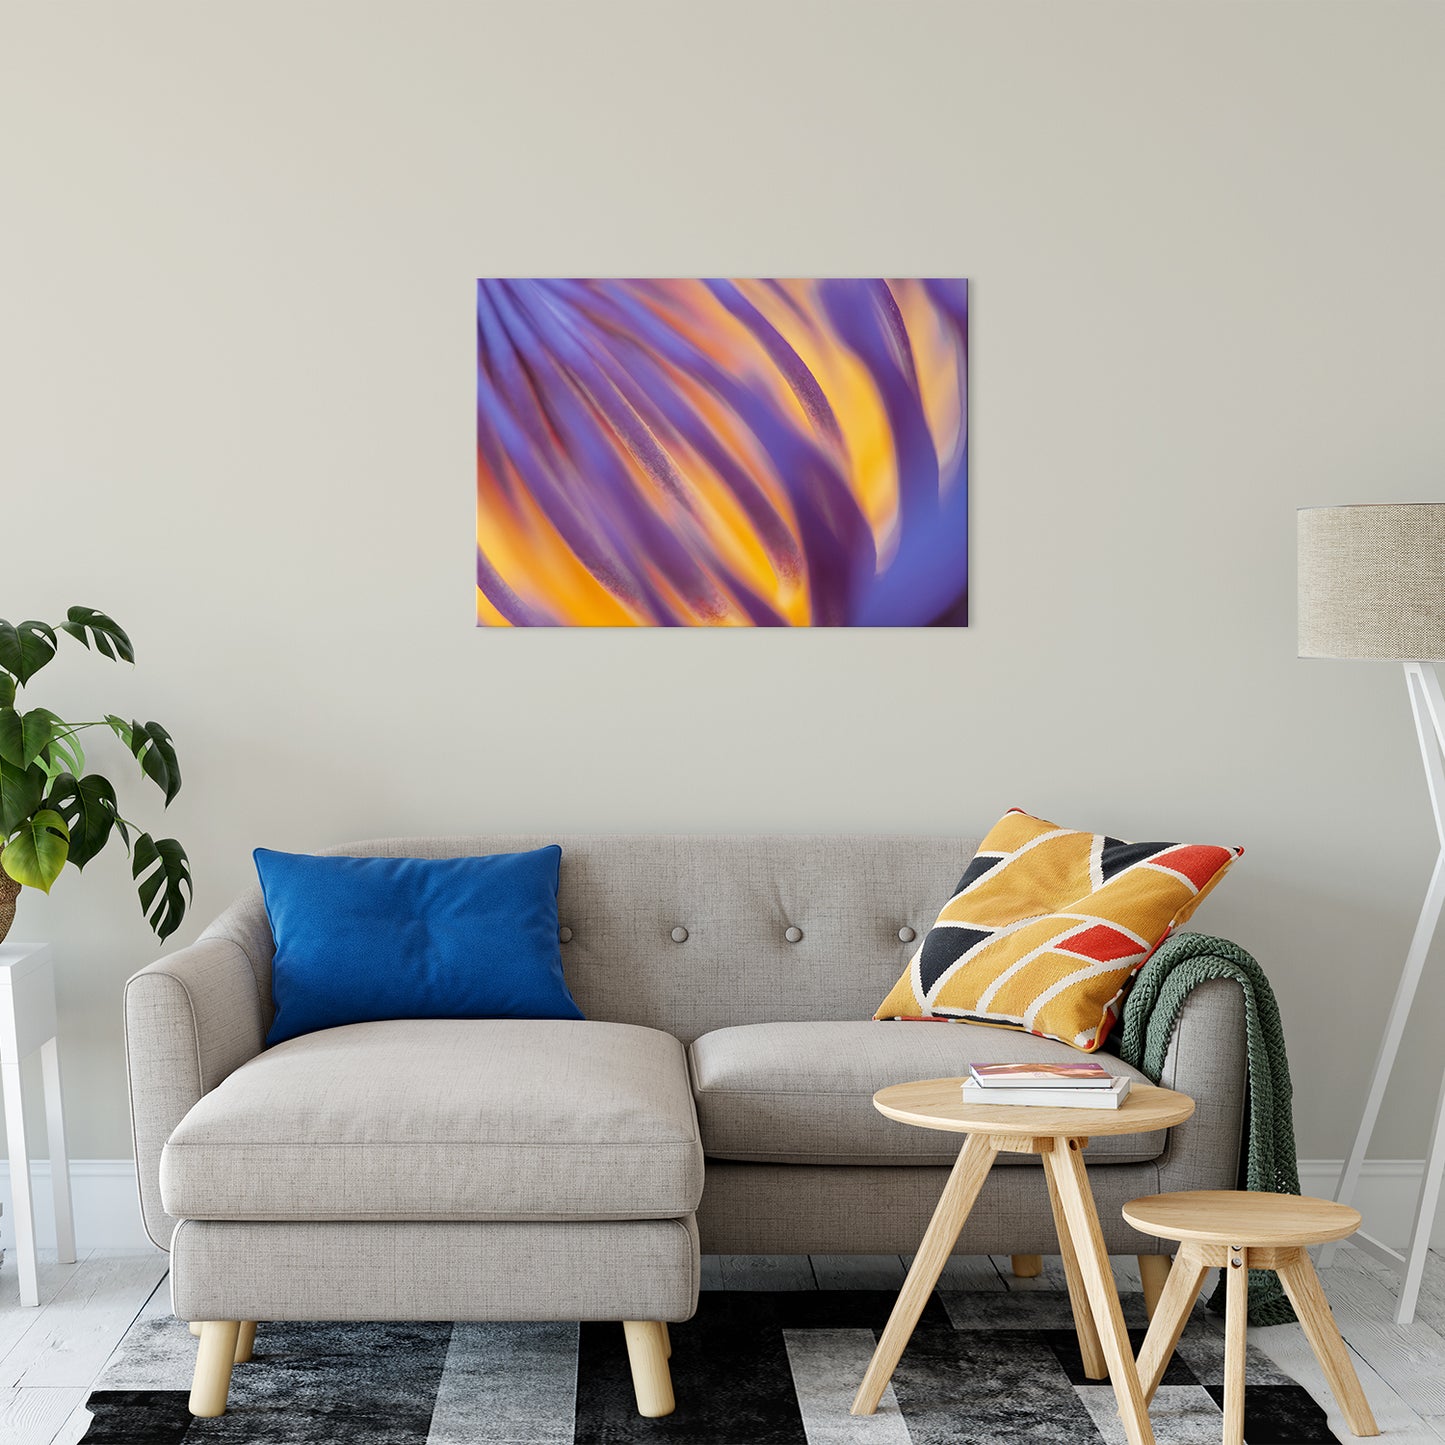 Purple and Yellow Lotus Flower Filaments Fine Art Canvas Print 24" x 36" - PIPAFINEART